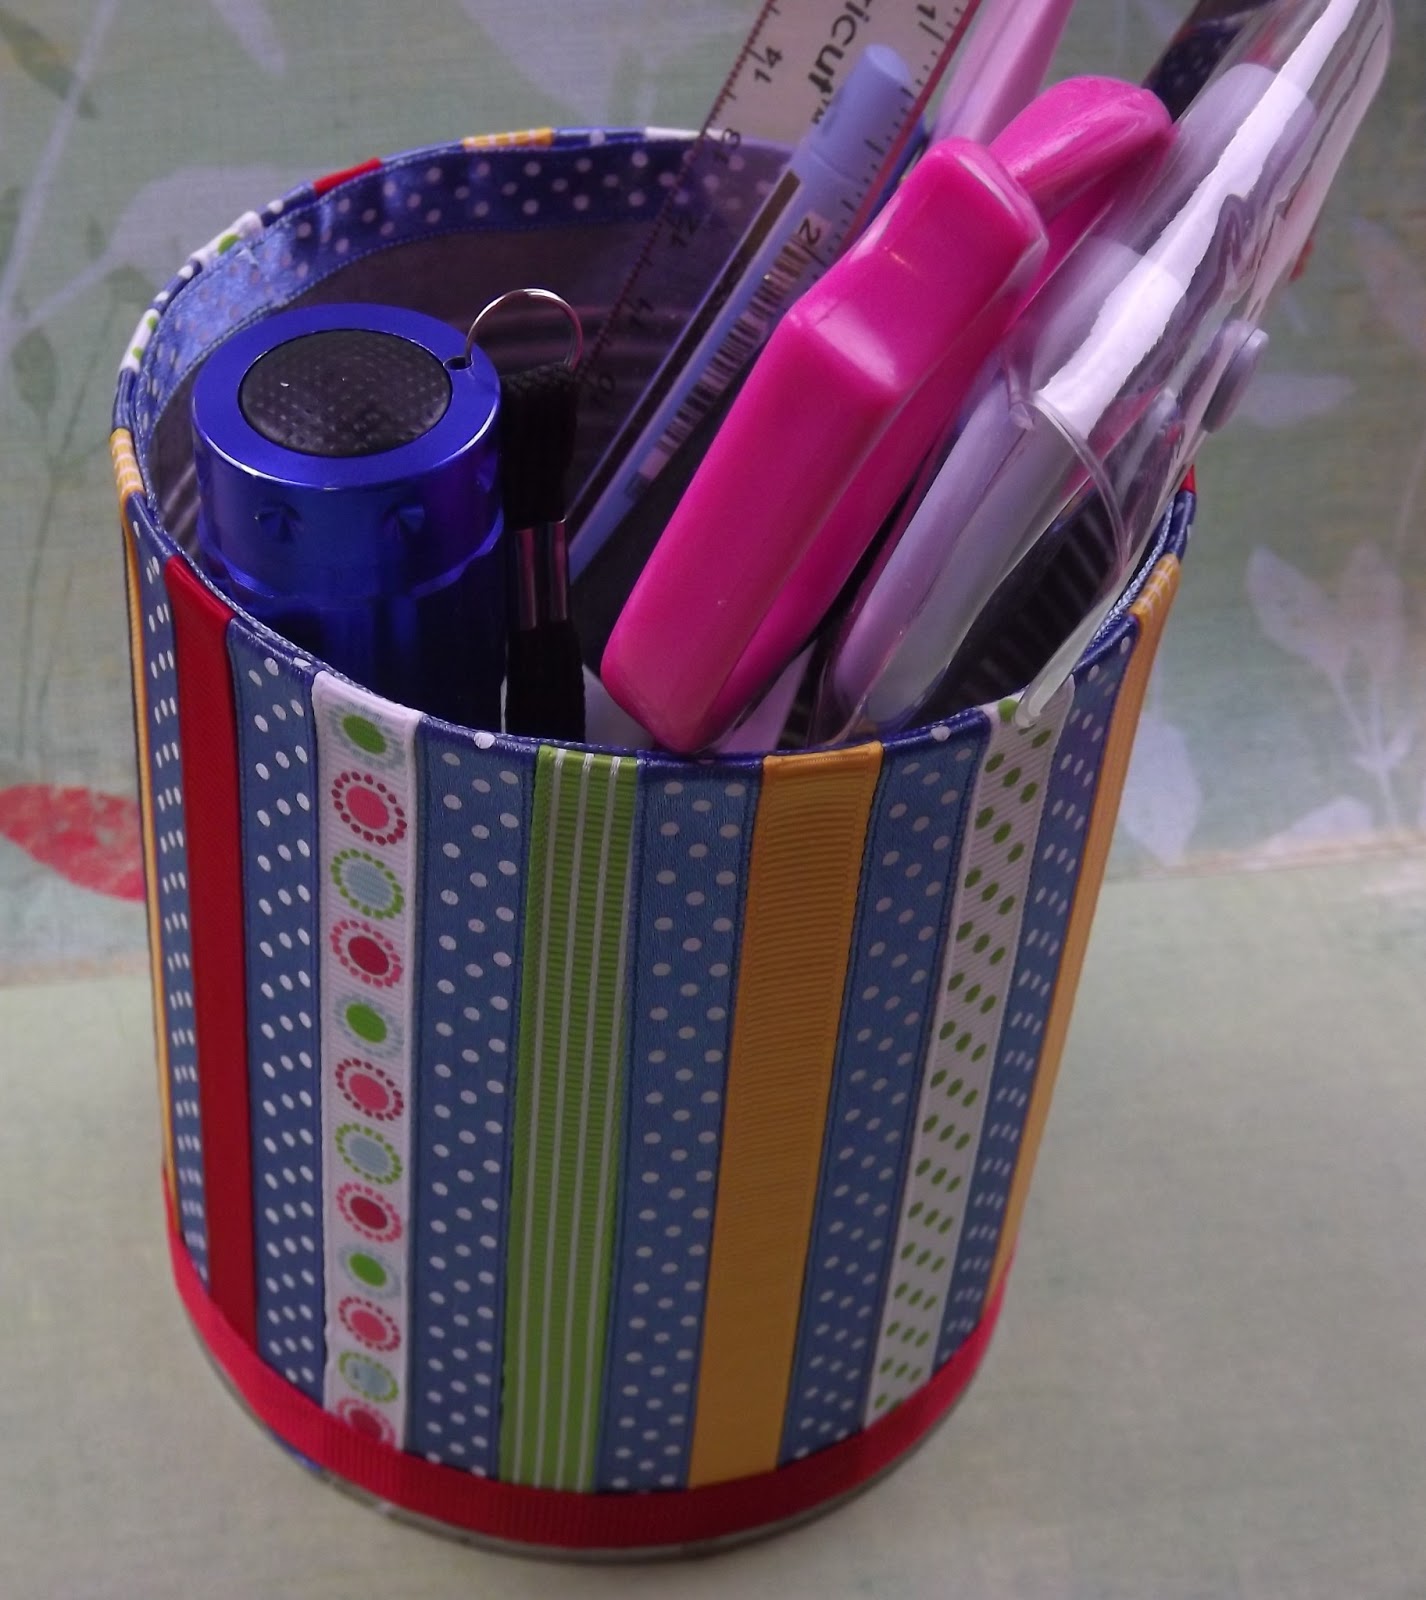 Flo's-a-Scrapin: recycle containers with ribbon